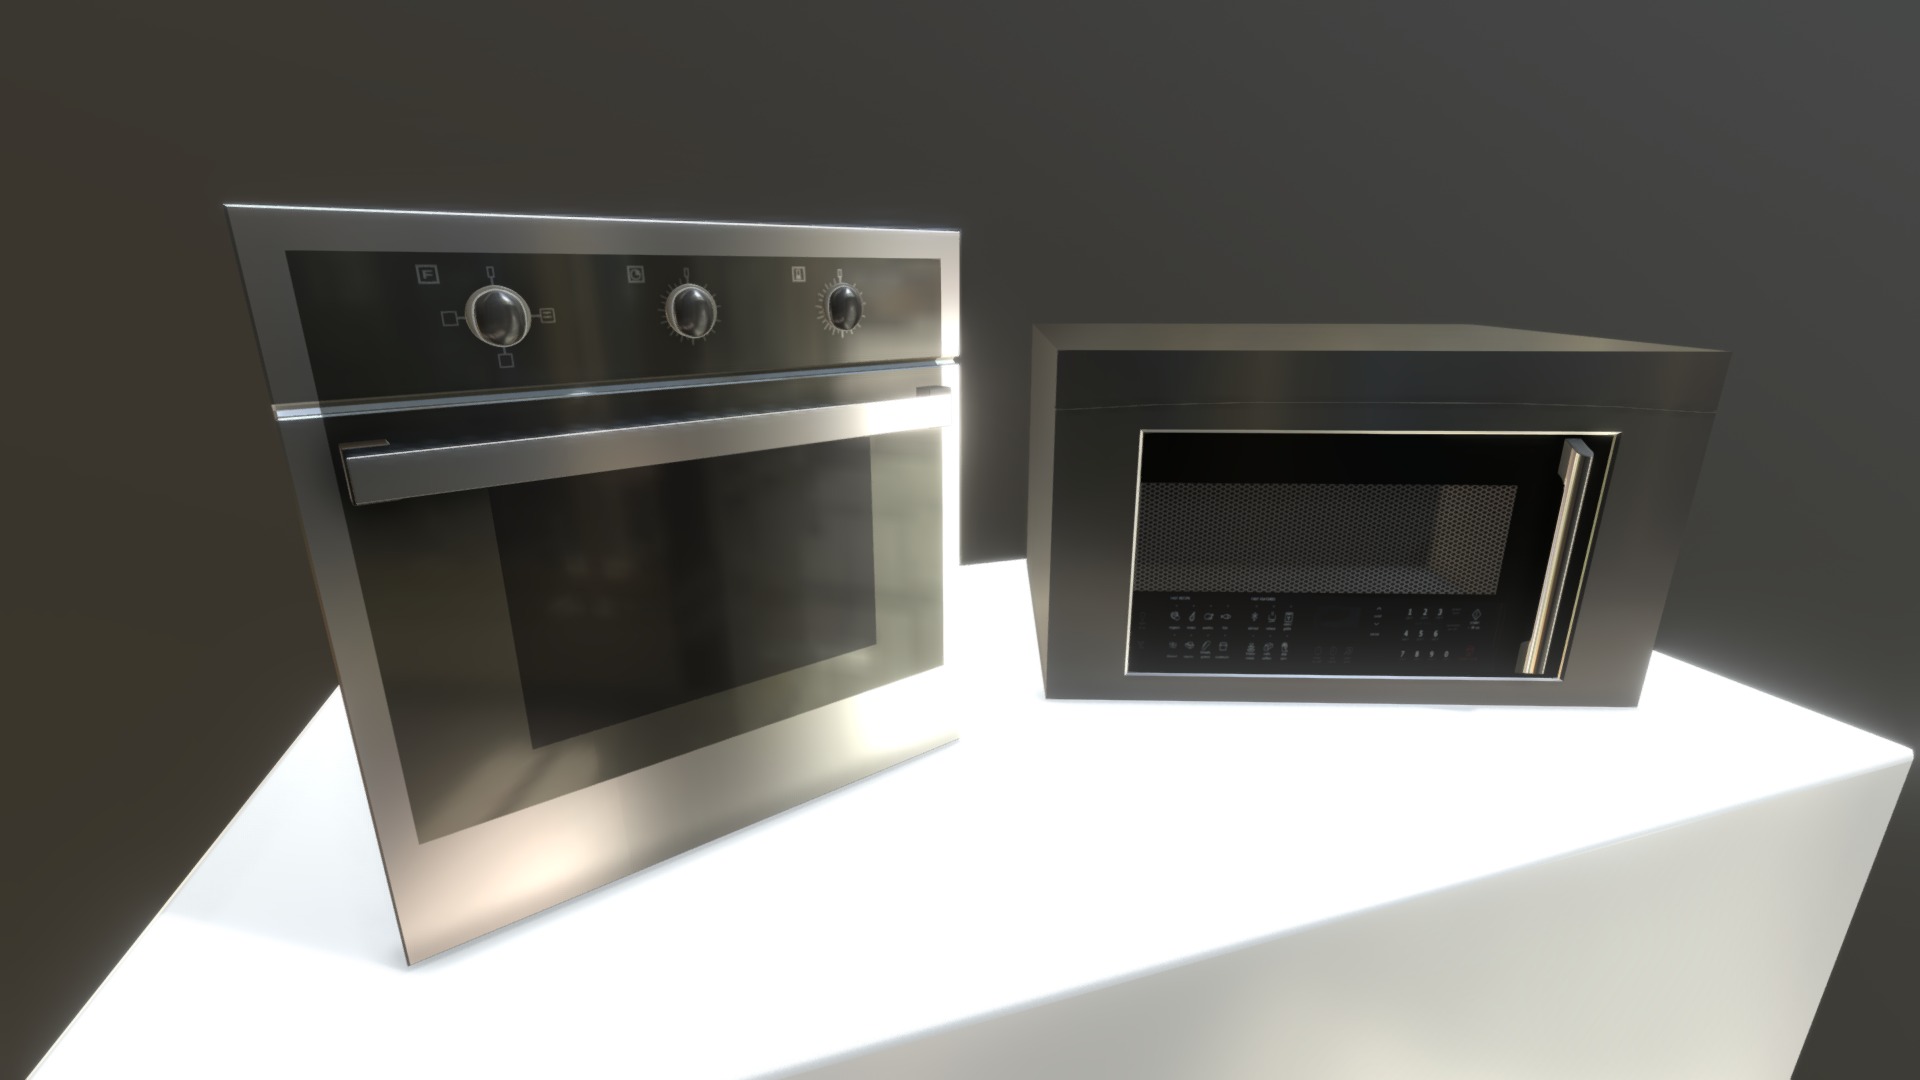 3D model OVENS - This is a 3D model of the OVENS. The 3D model is about a microwave oven and a microwave.